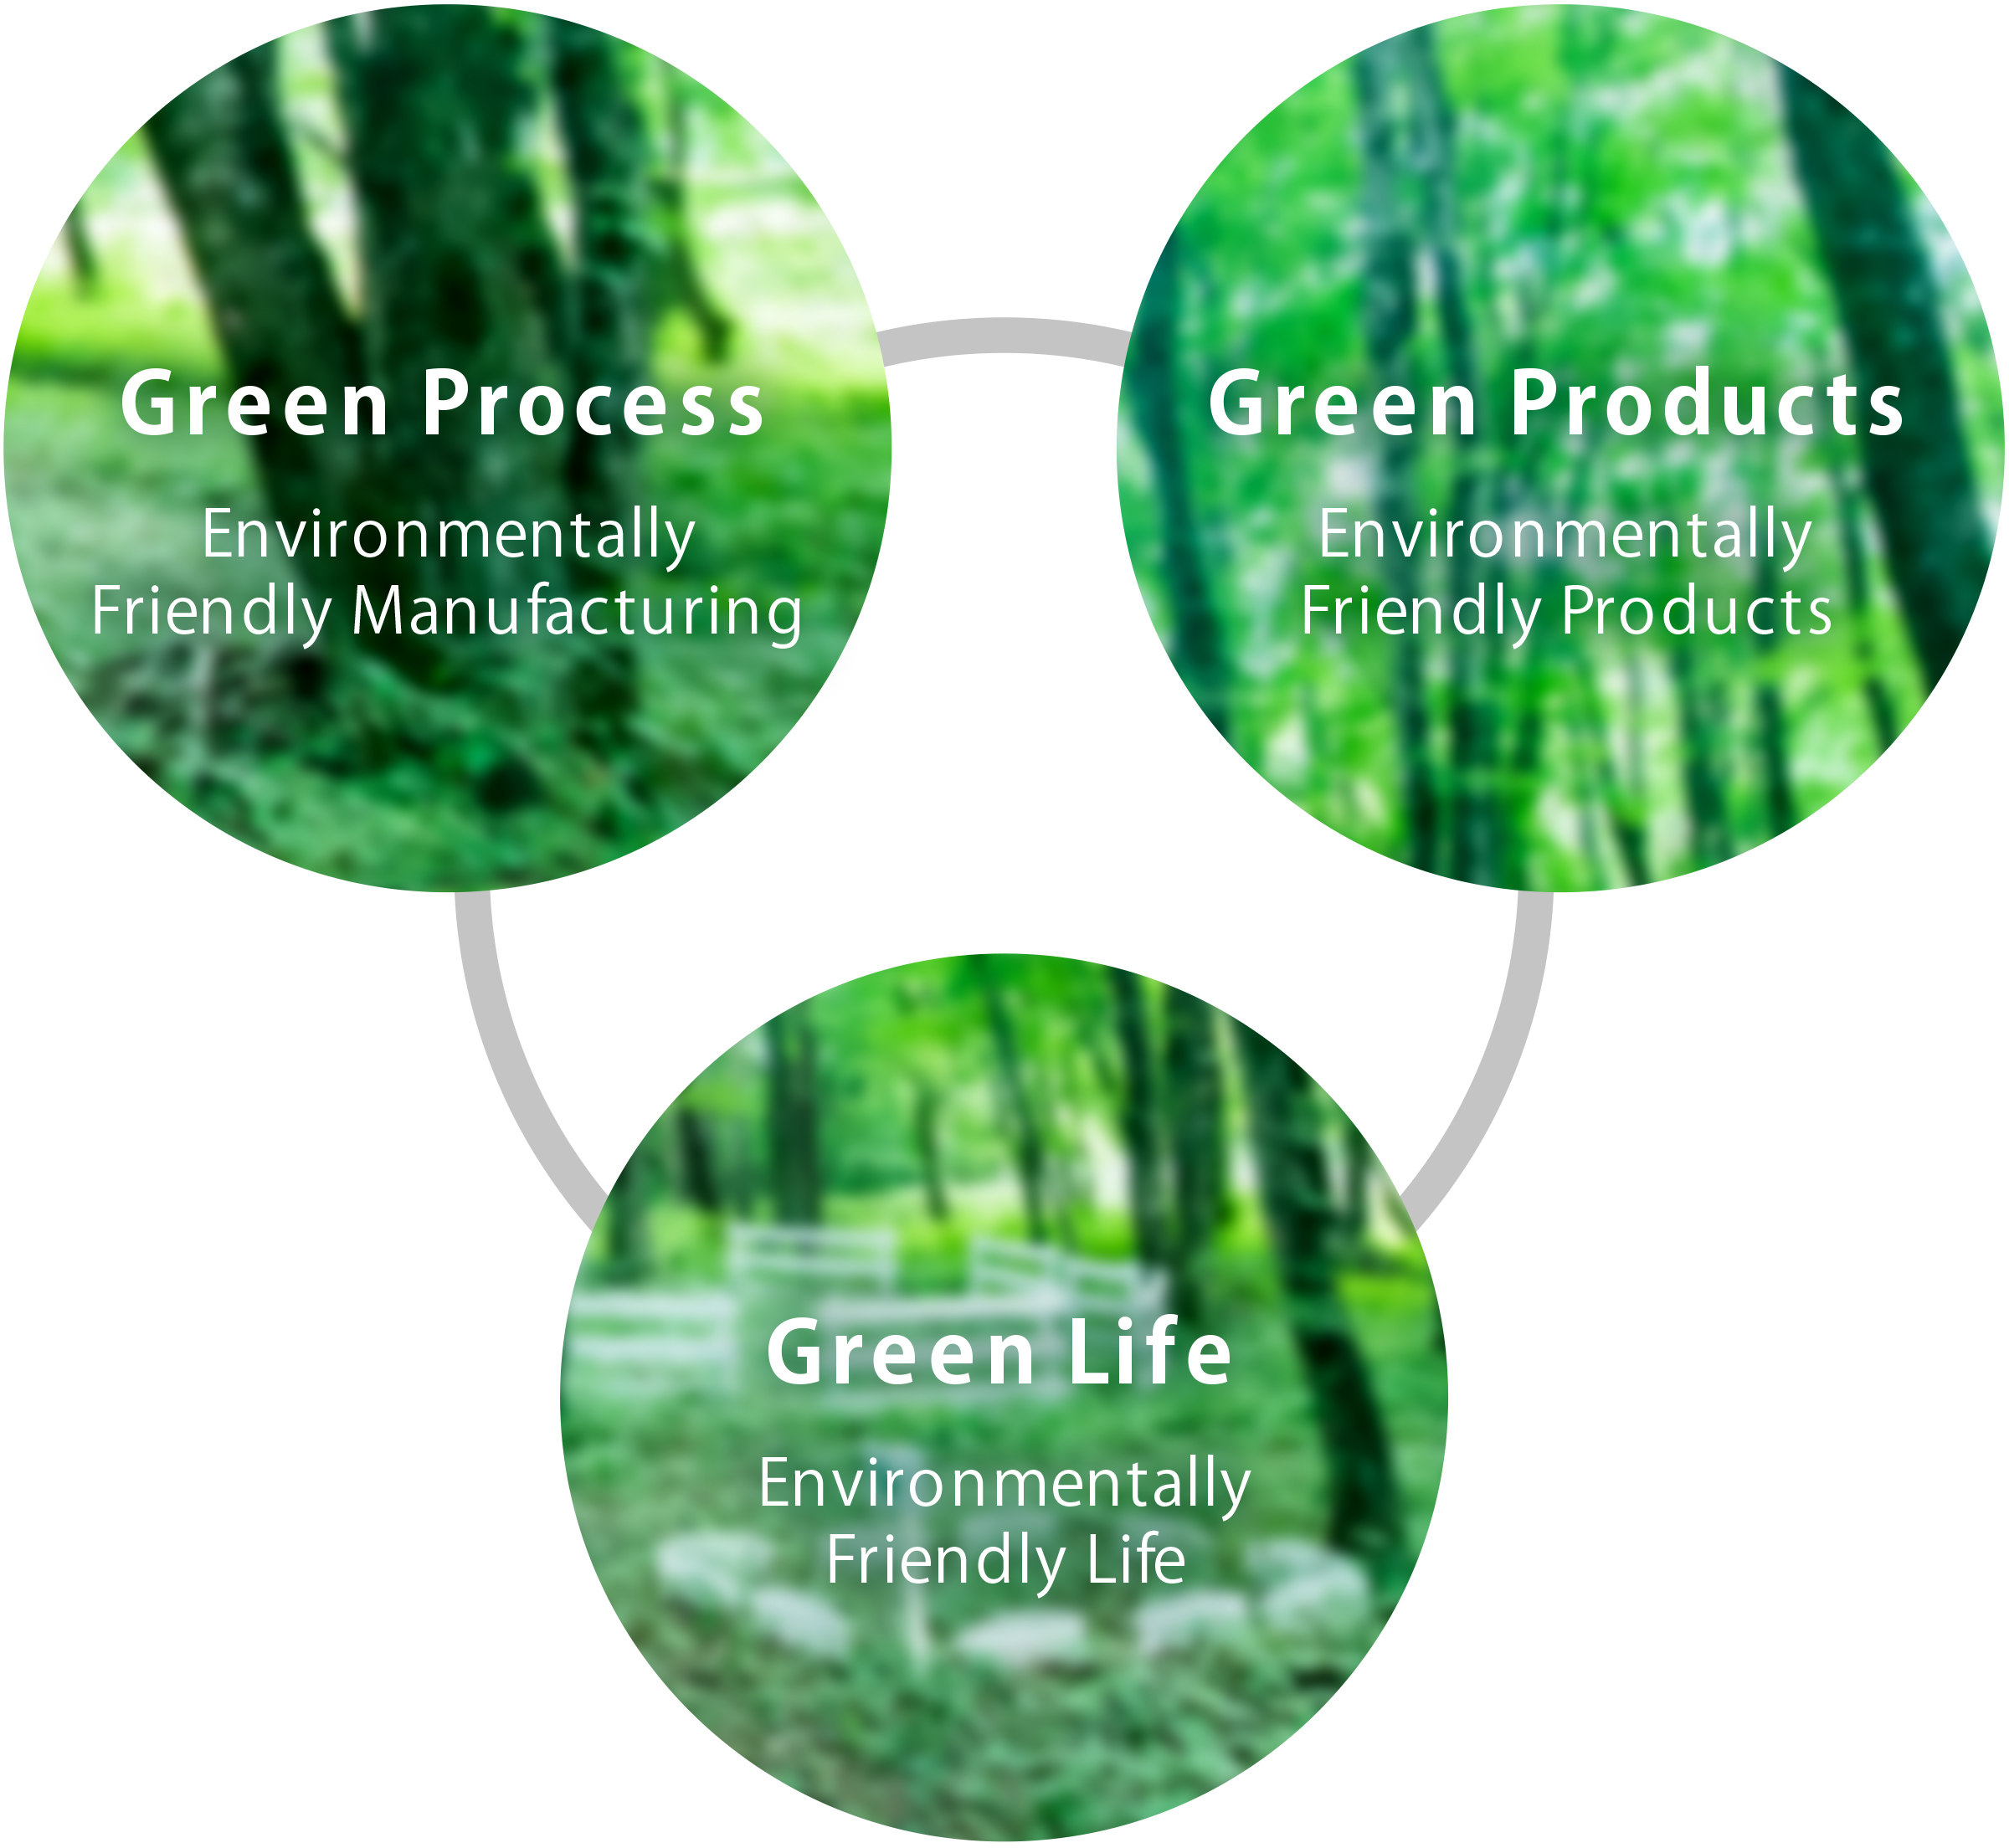 “Three Green Plan” concept: Green Process, Green Products and Green Life.